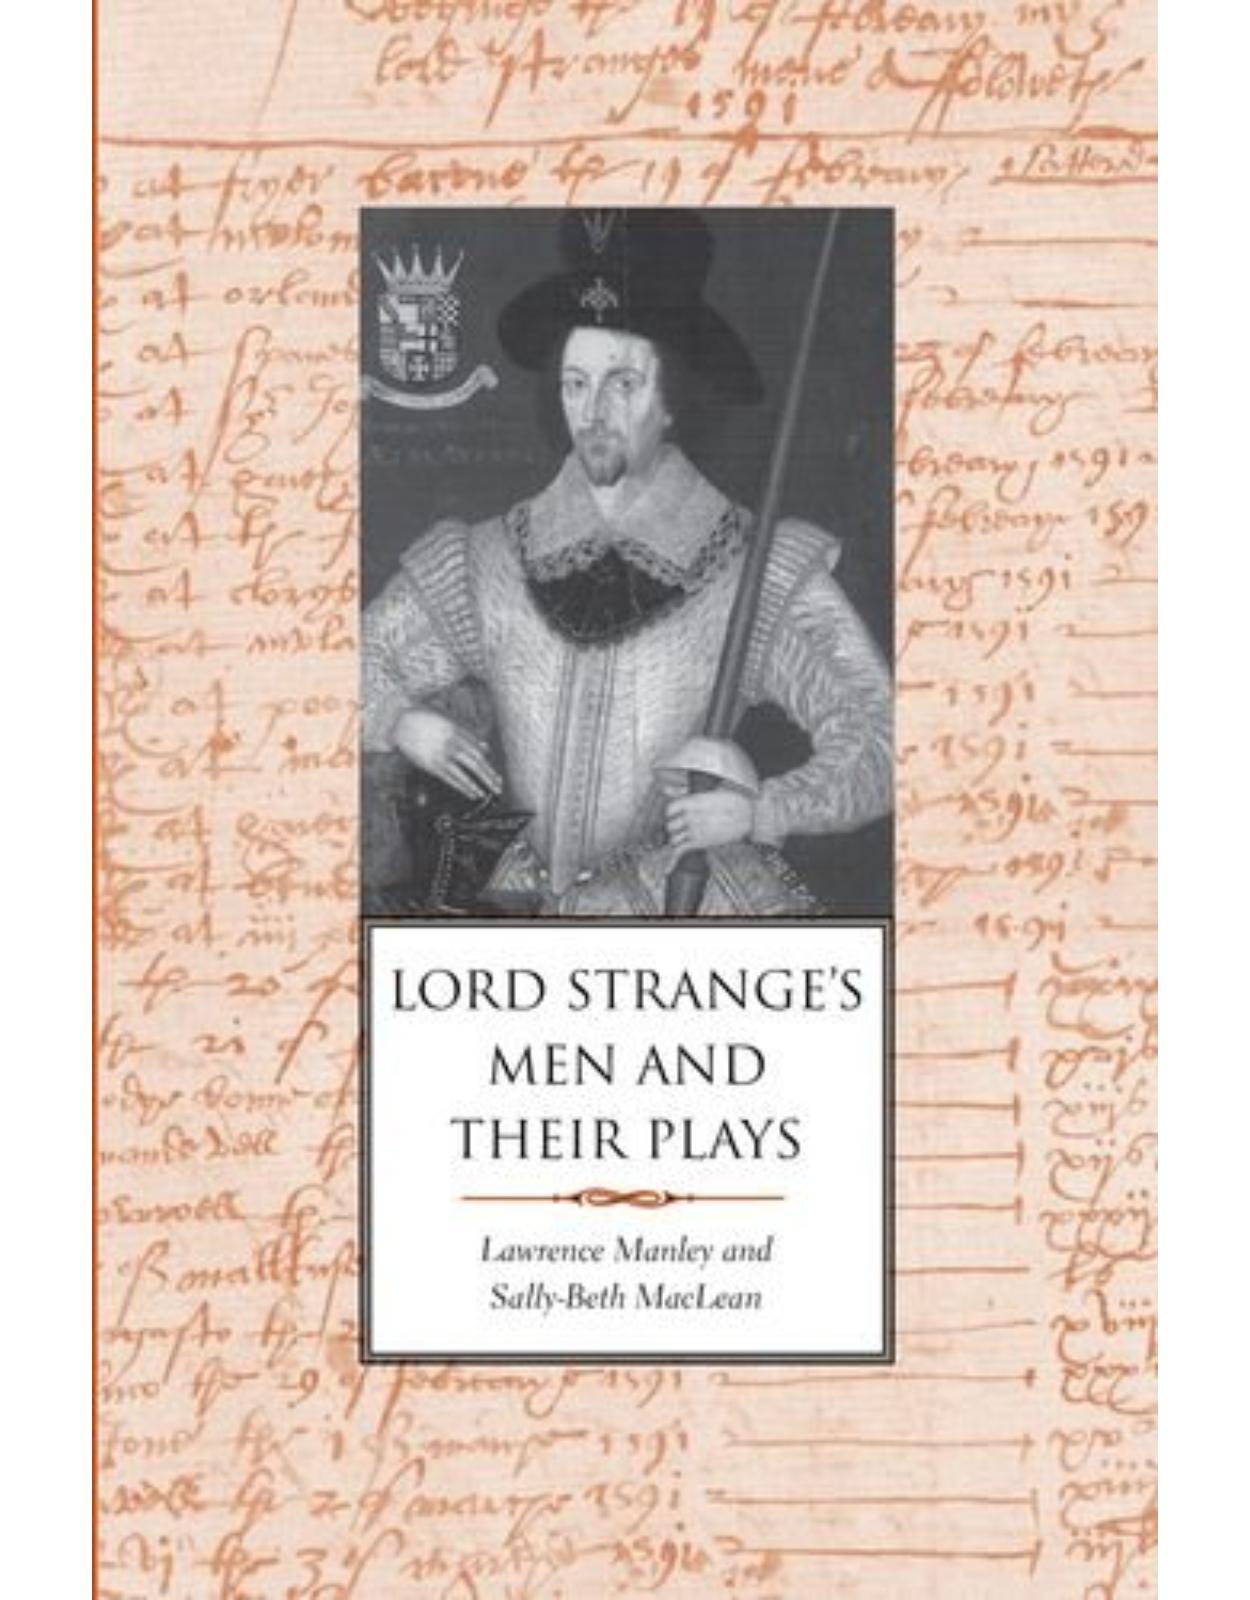 Lord Strange's Men and Their Plays.